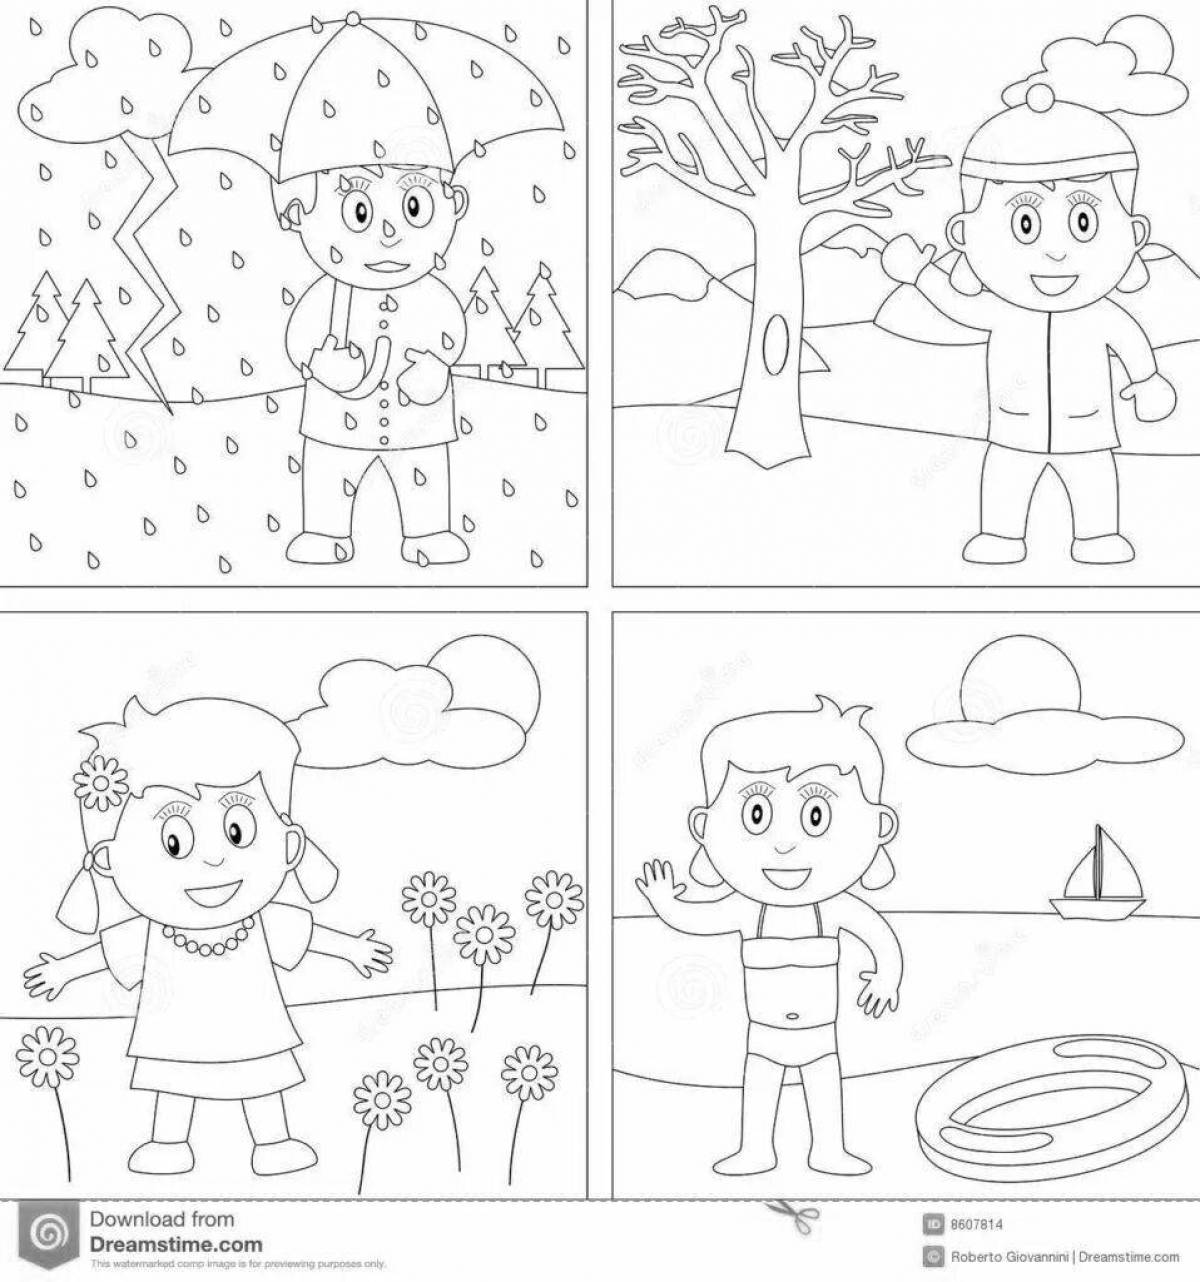 Coloring for children